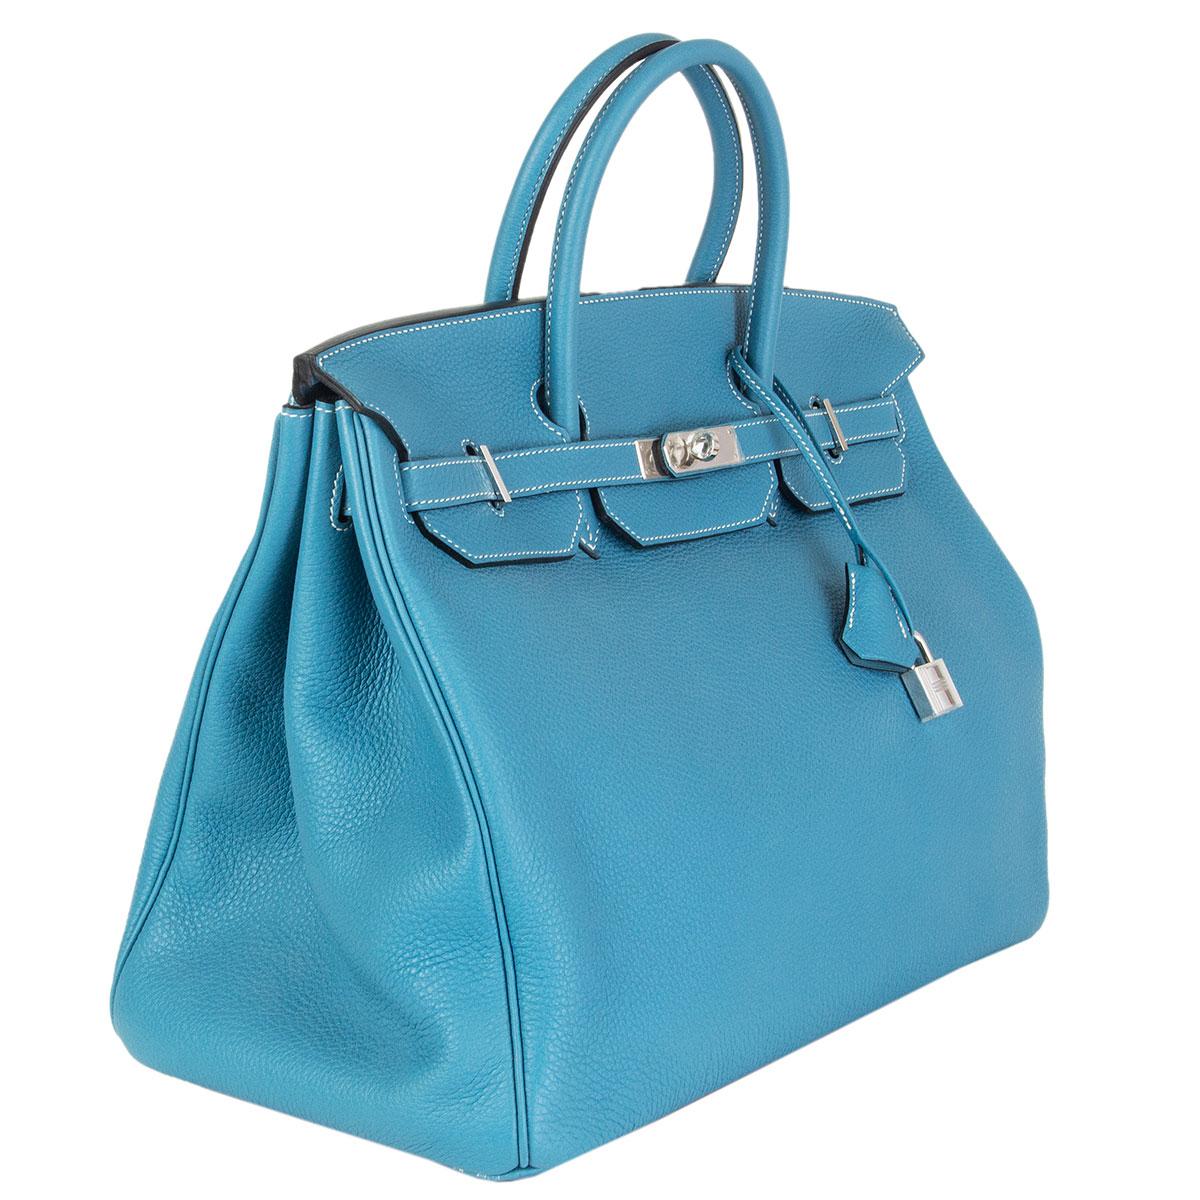 Hermès 'Birkin 40' bag in Blue Jean (light blue) Veau Togo leather with contrasting white stitching and palladium hardware. Lined in Chevre (goat skin) with an open pocket against the front and a zipper pocket against the back. Brand new. Comes with